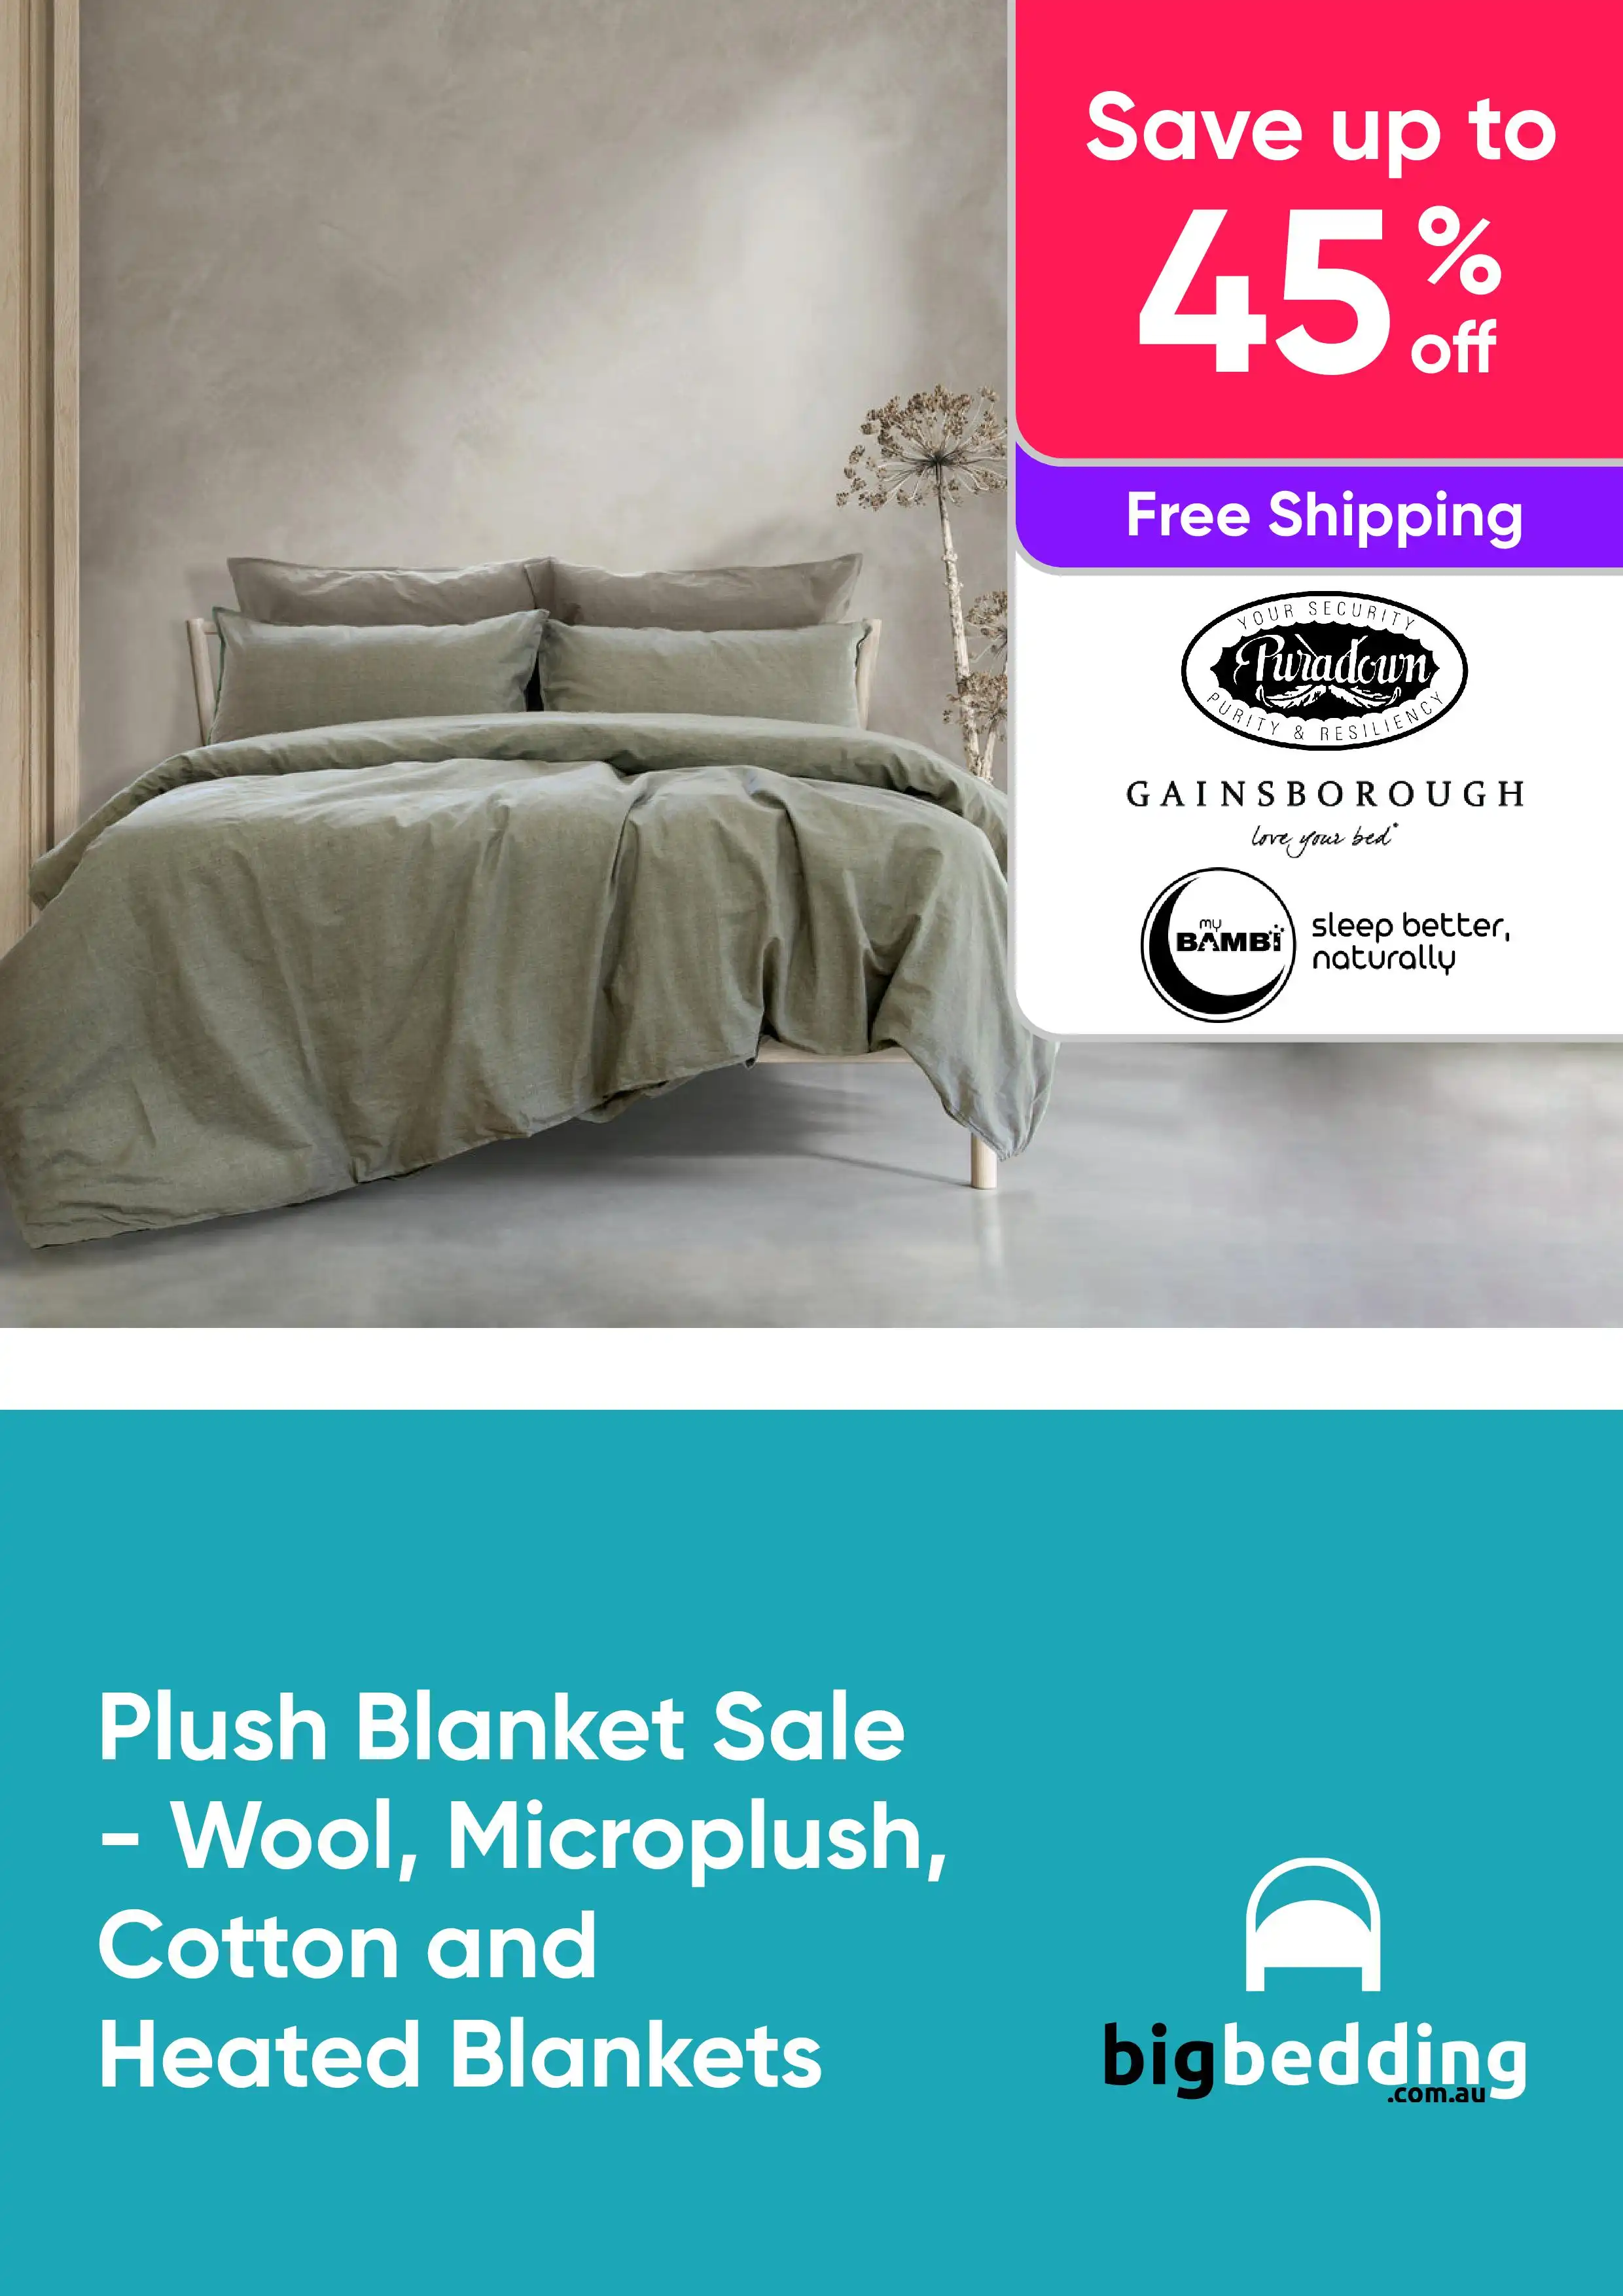 Plush Blanket Sale - Save up to 45% off a Range of Wool, Microplush, Cotton and Heated Blankets